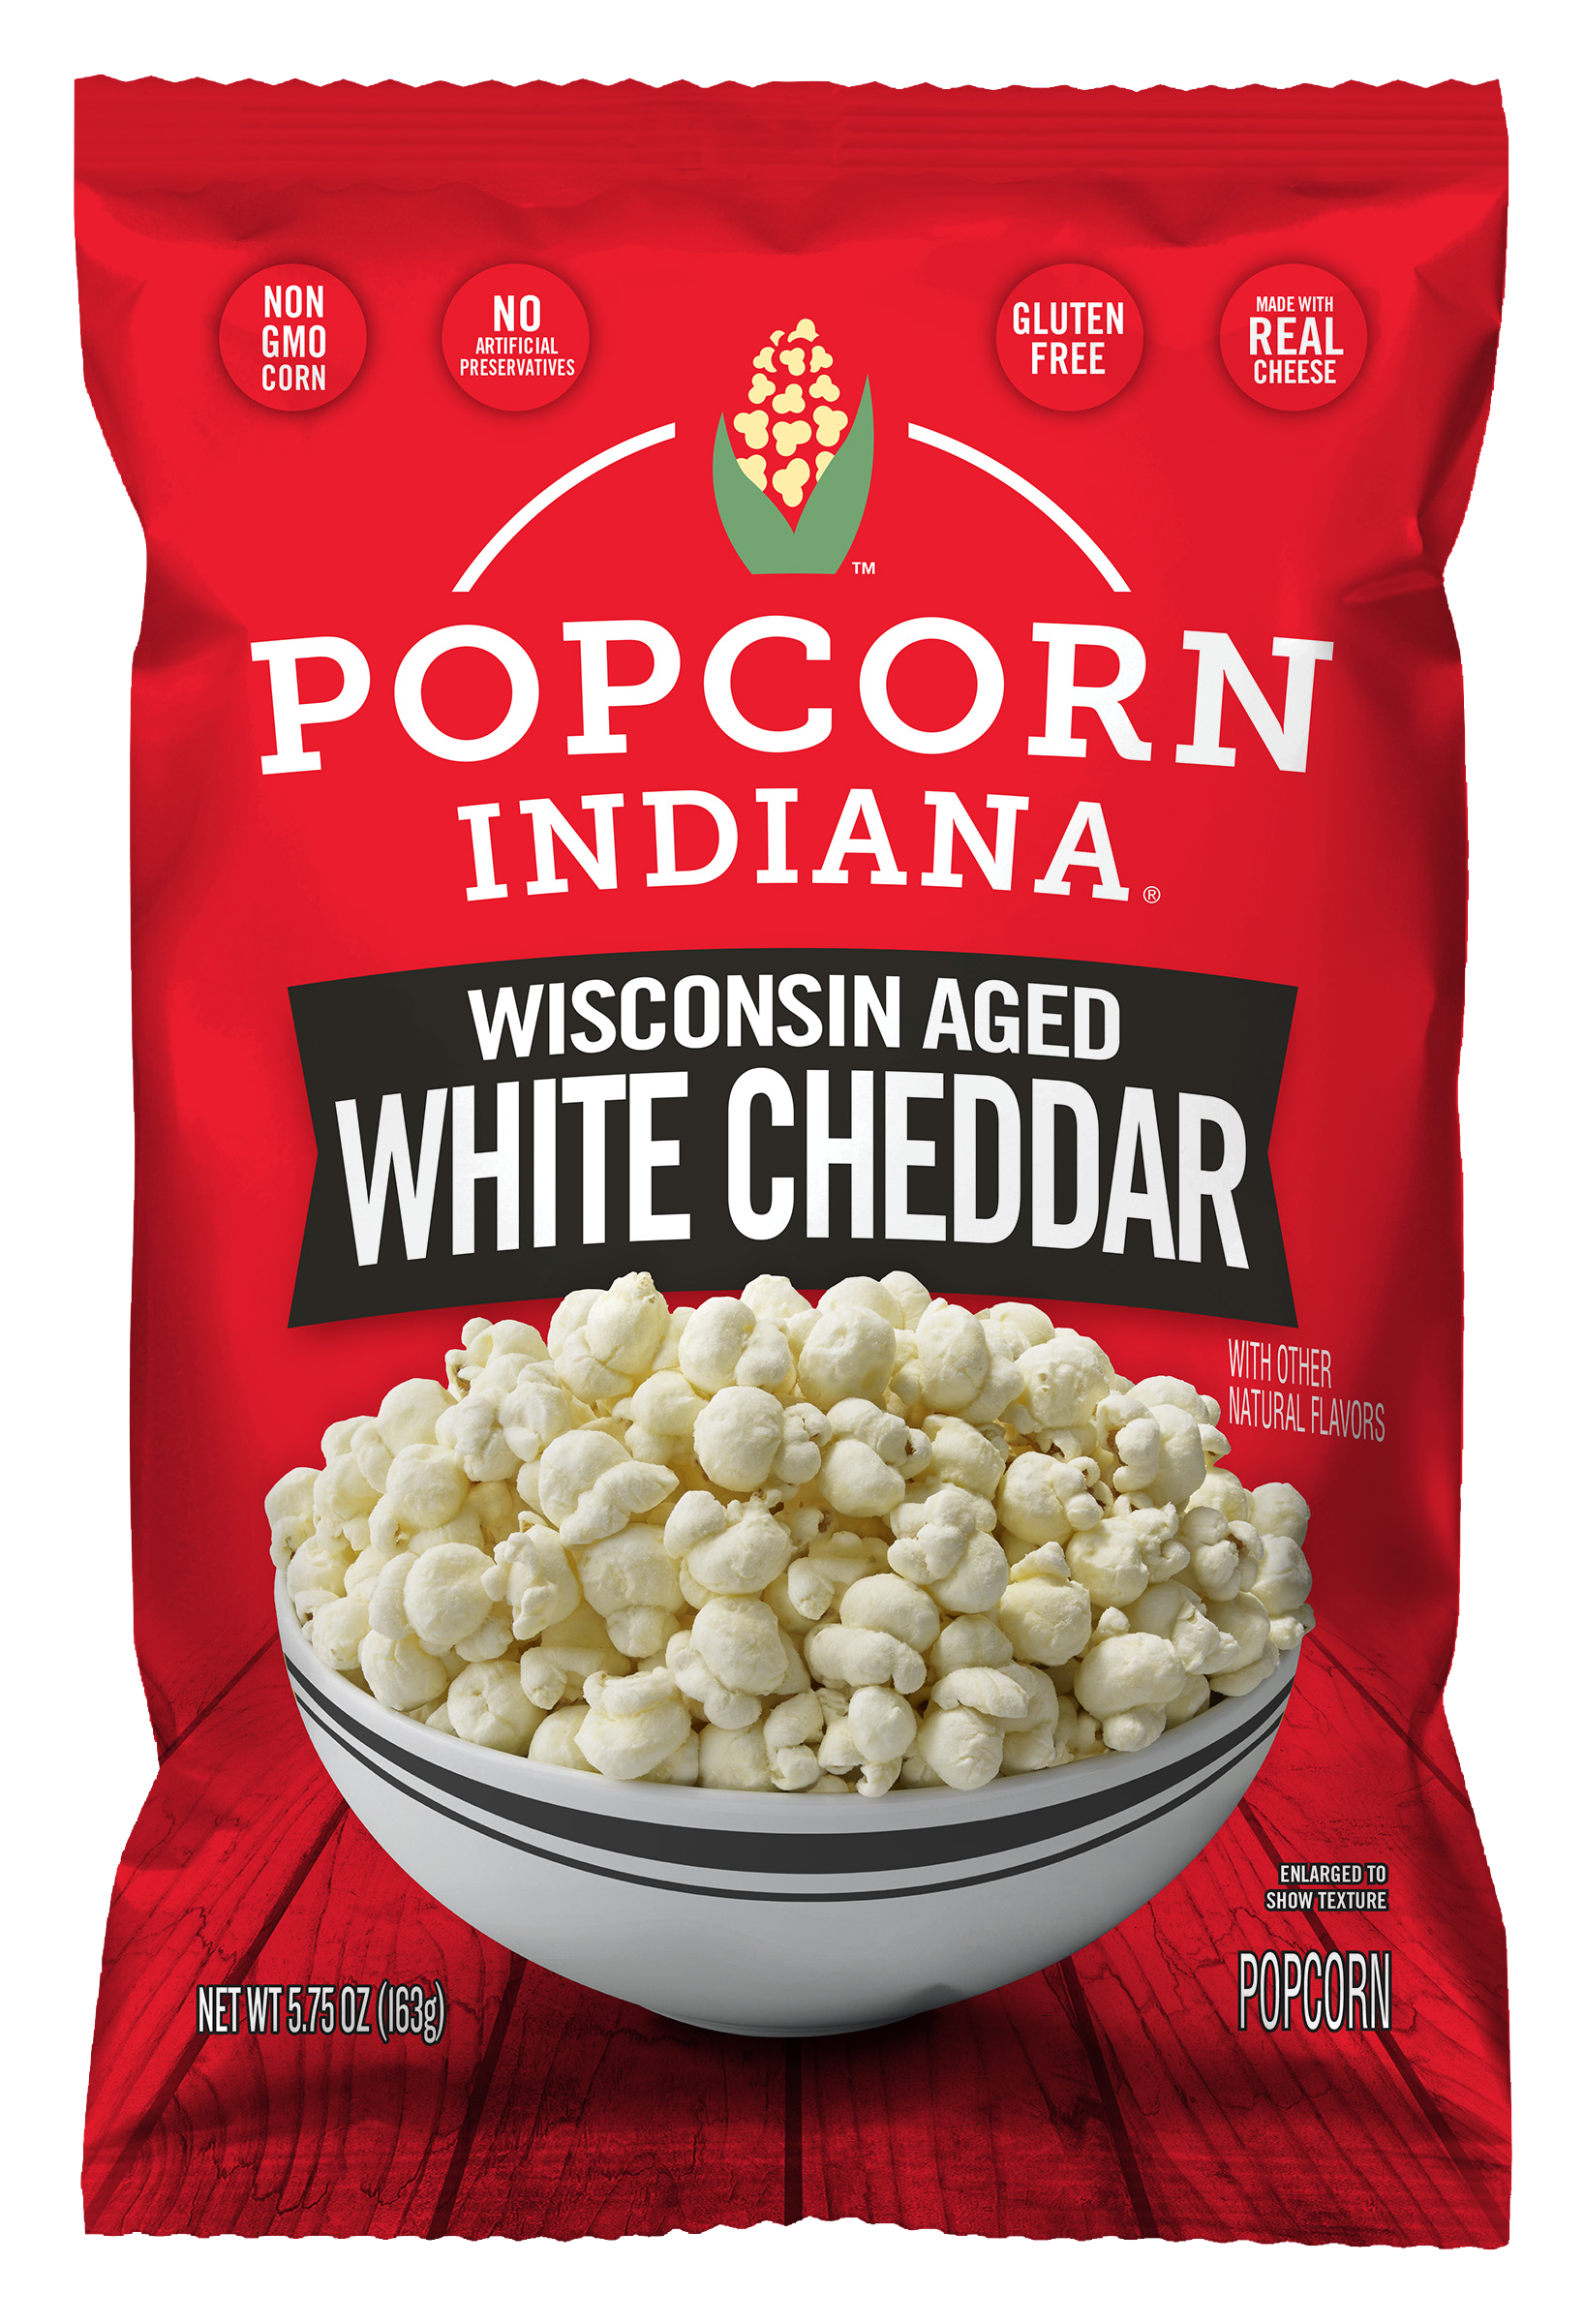 Wisconsin Aged White Cheddar